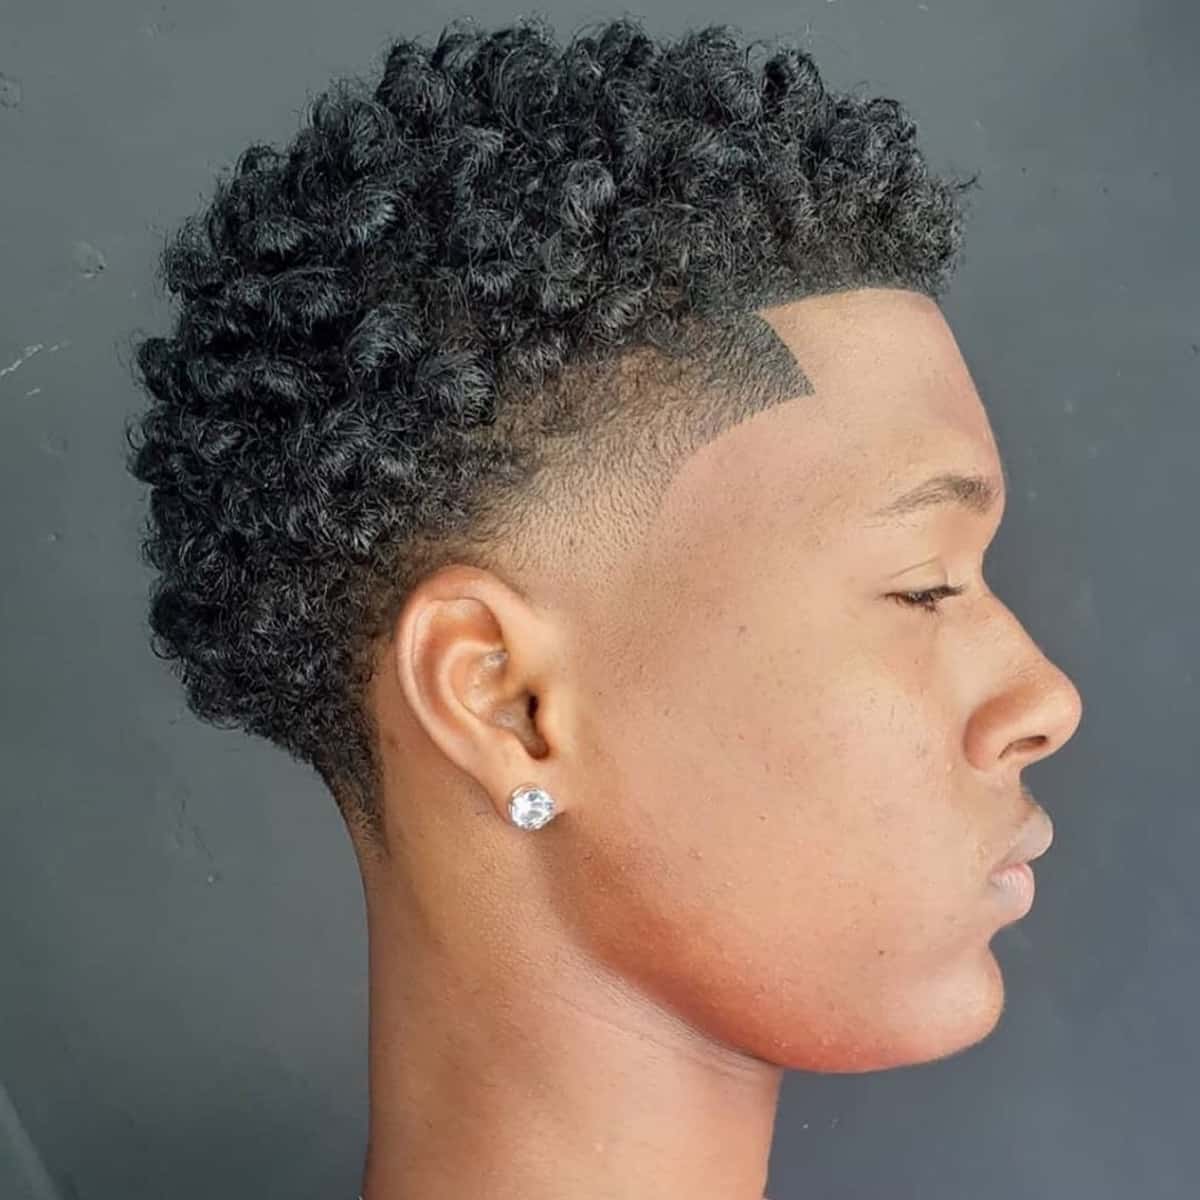 20 Best Temp Fade Haircuts For Men Trending In 2021 If you want to change you look with hairstyle than you can try to fade haircut, with faded when it's an afro fade, temple fade, taper fade, high top fade, or skin fade, black men's haircuts look great with faded hair all over the sides. 20 best temp fade haircuts for men